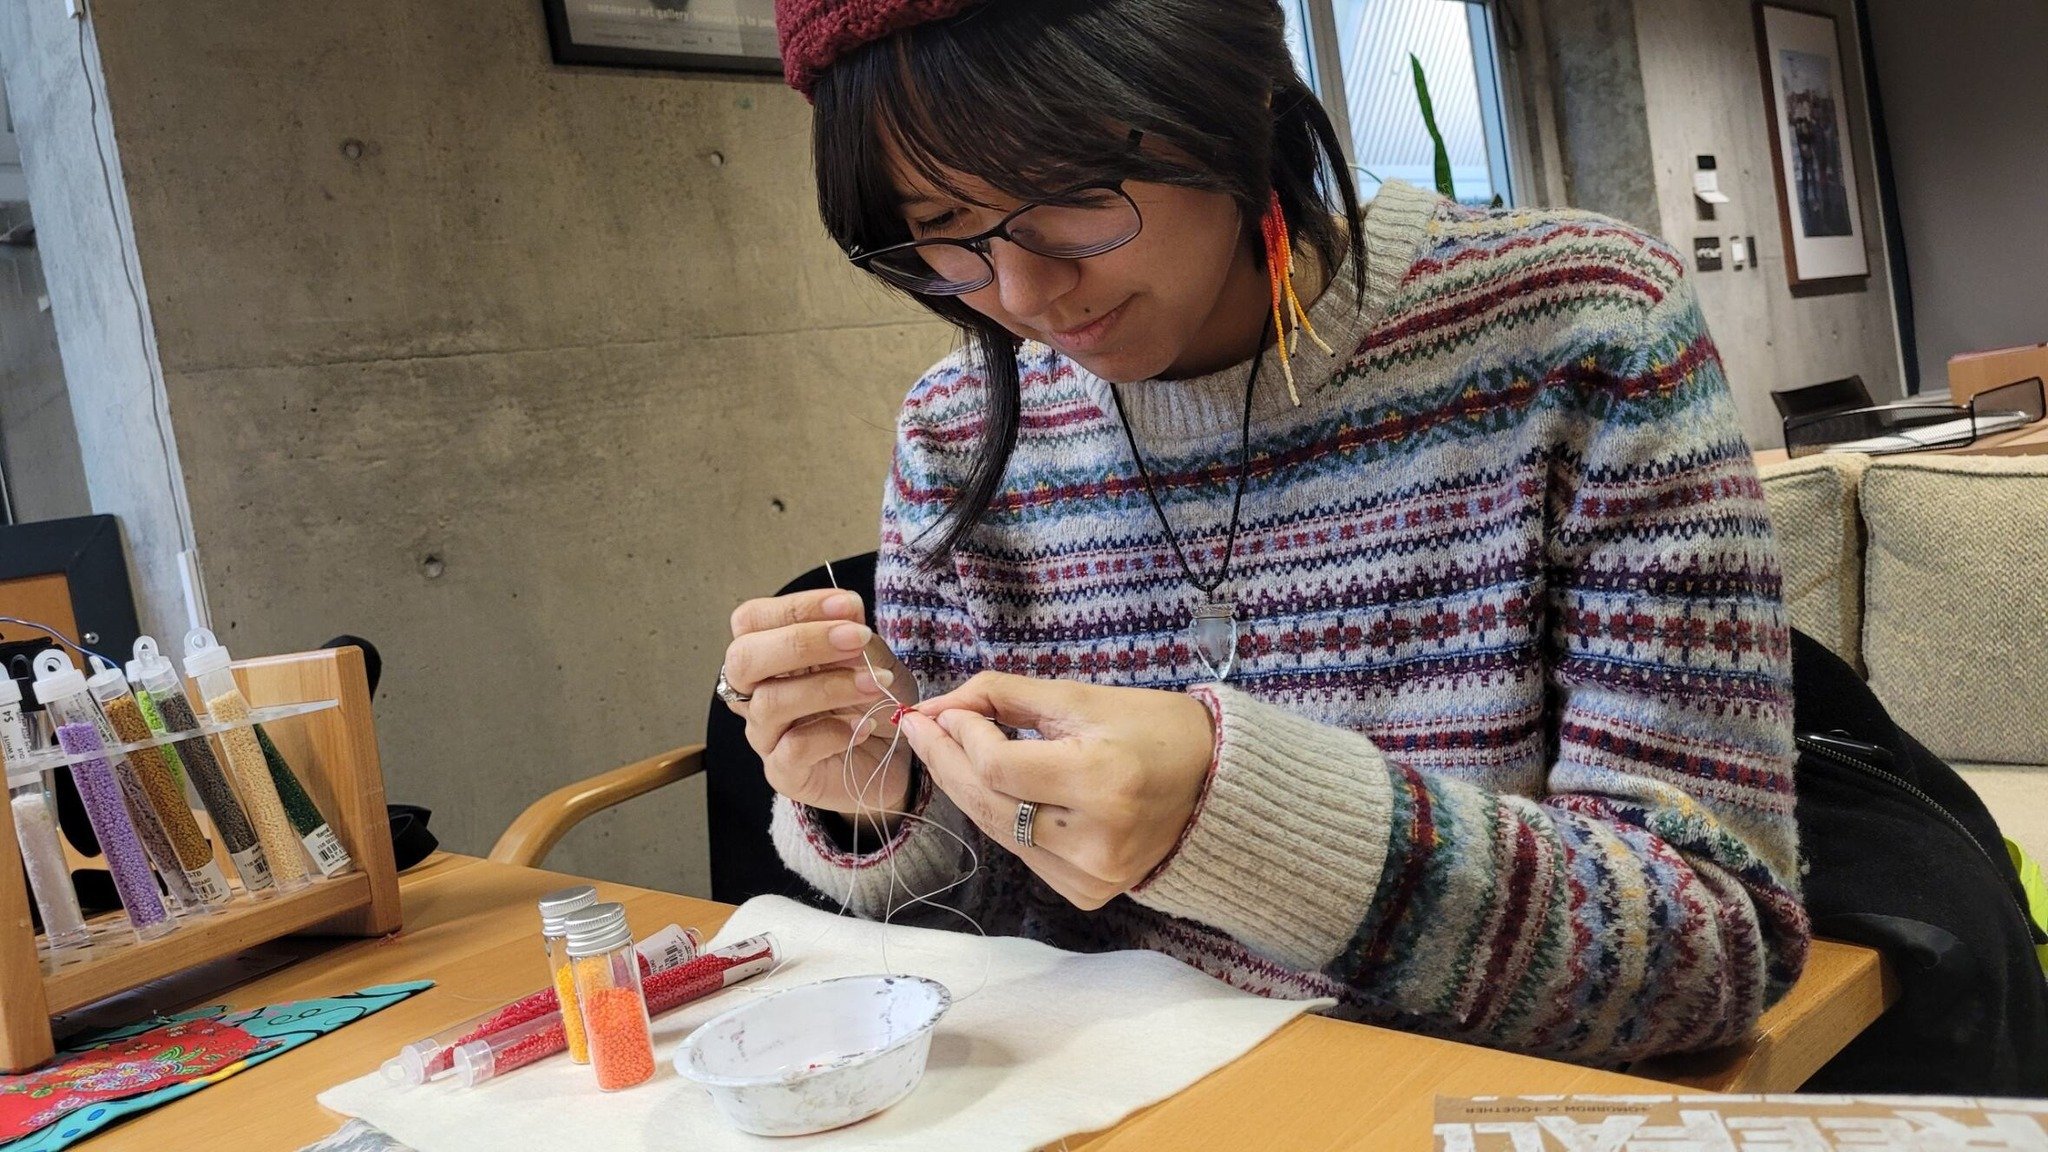 Join KAG art instructors and local artists Charlie and Ruby for Thursday afternoon beading circles! This is a welcoming and respectful studio-based program for people aged 14 to 19. All skill levels are welcome. Drop-in with an in-progress project or